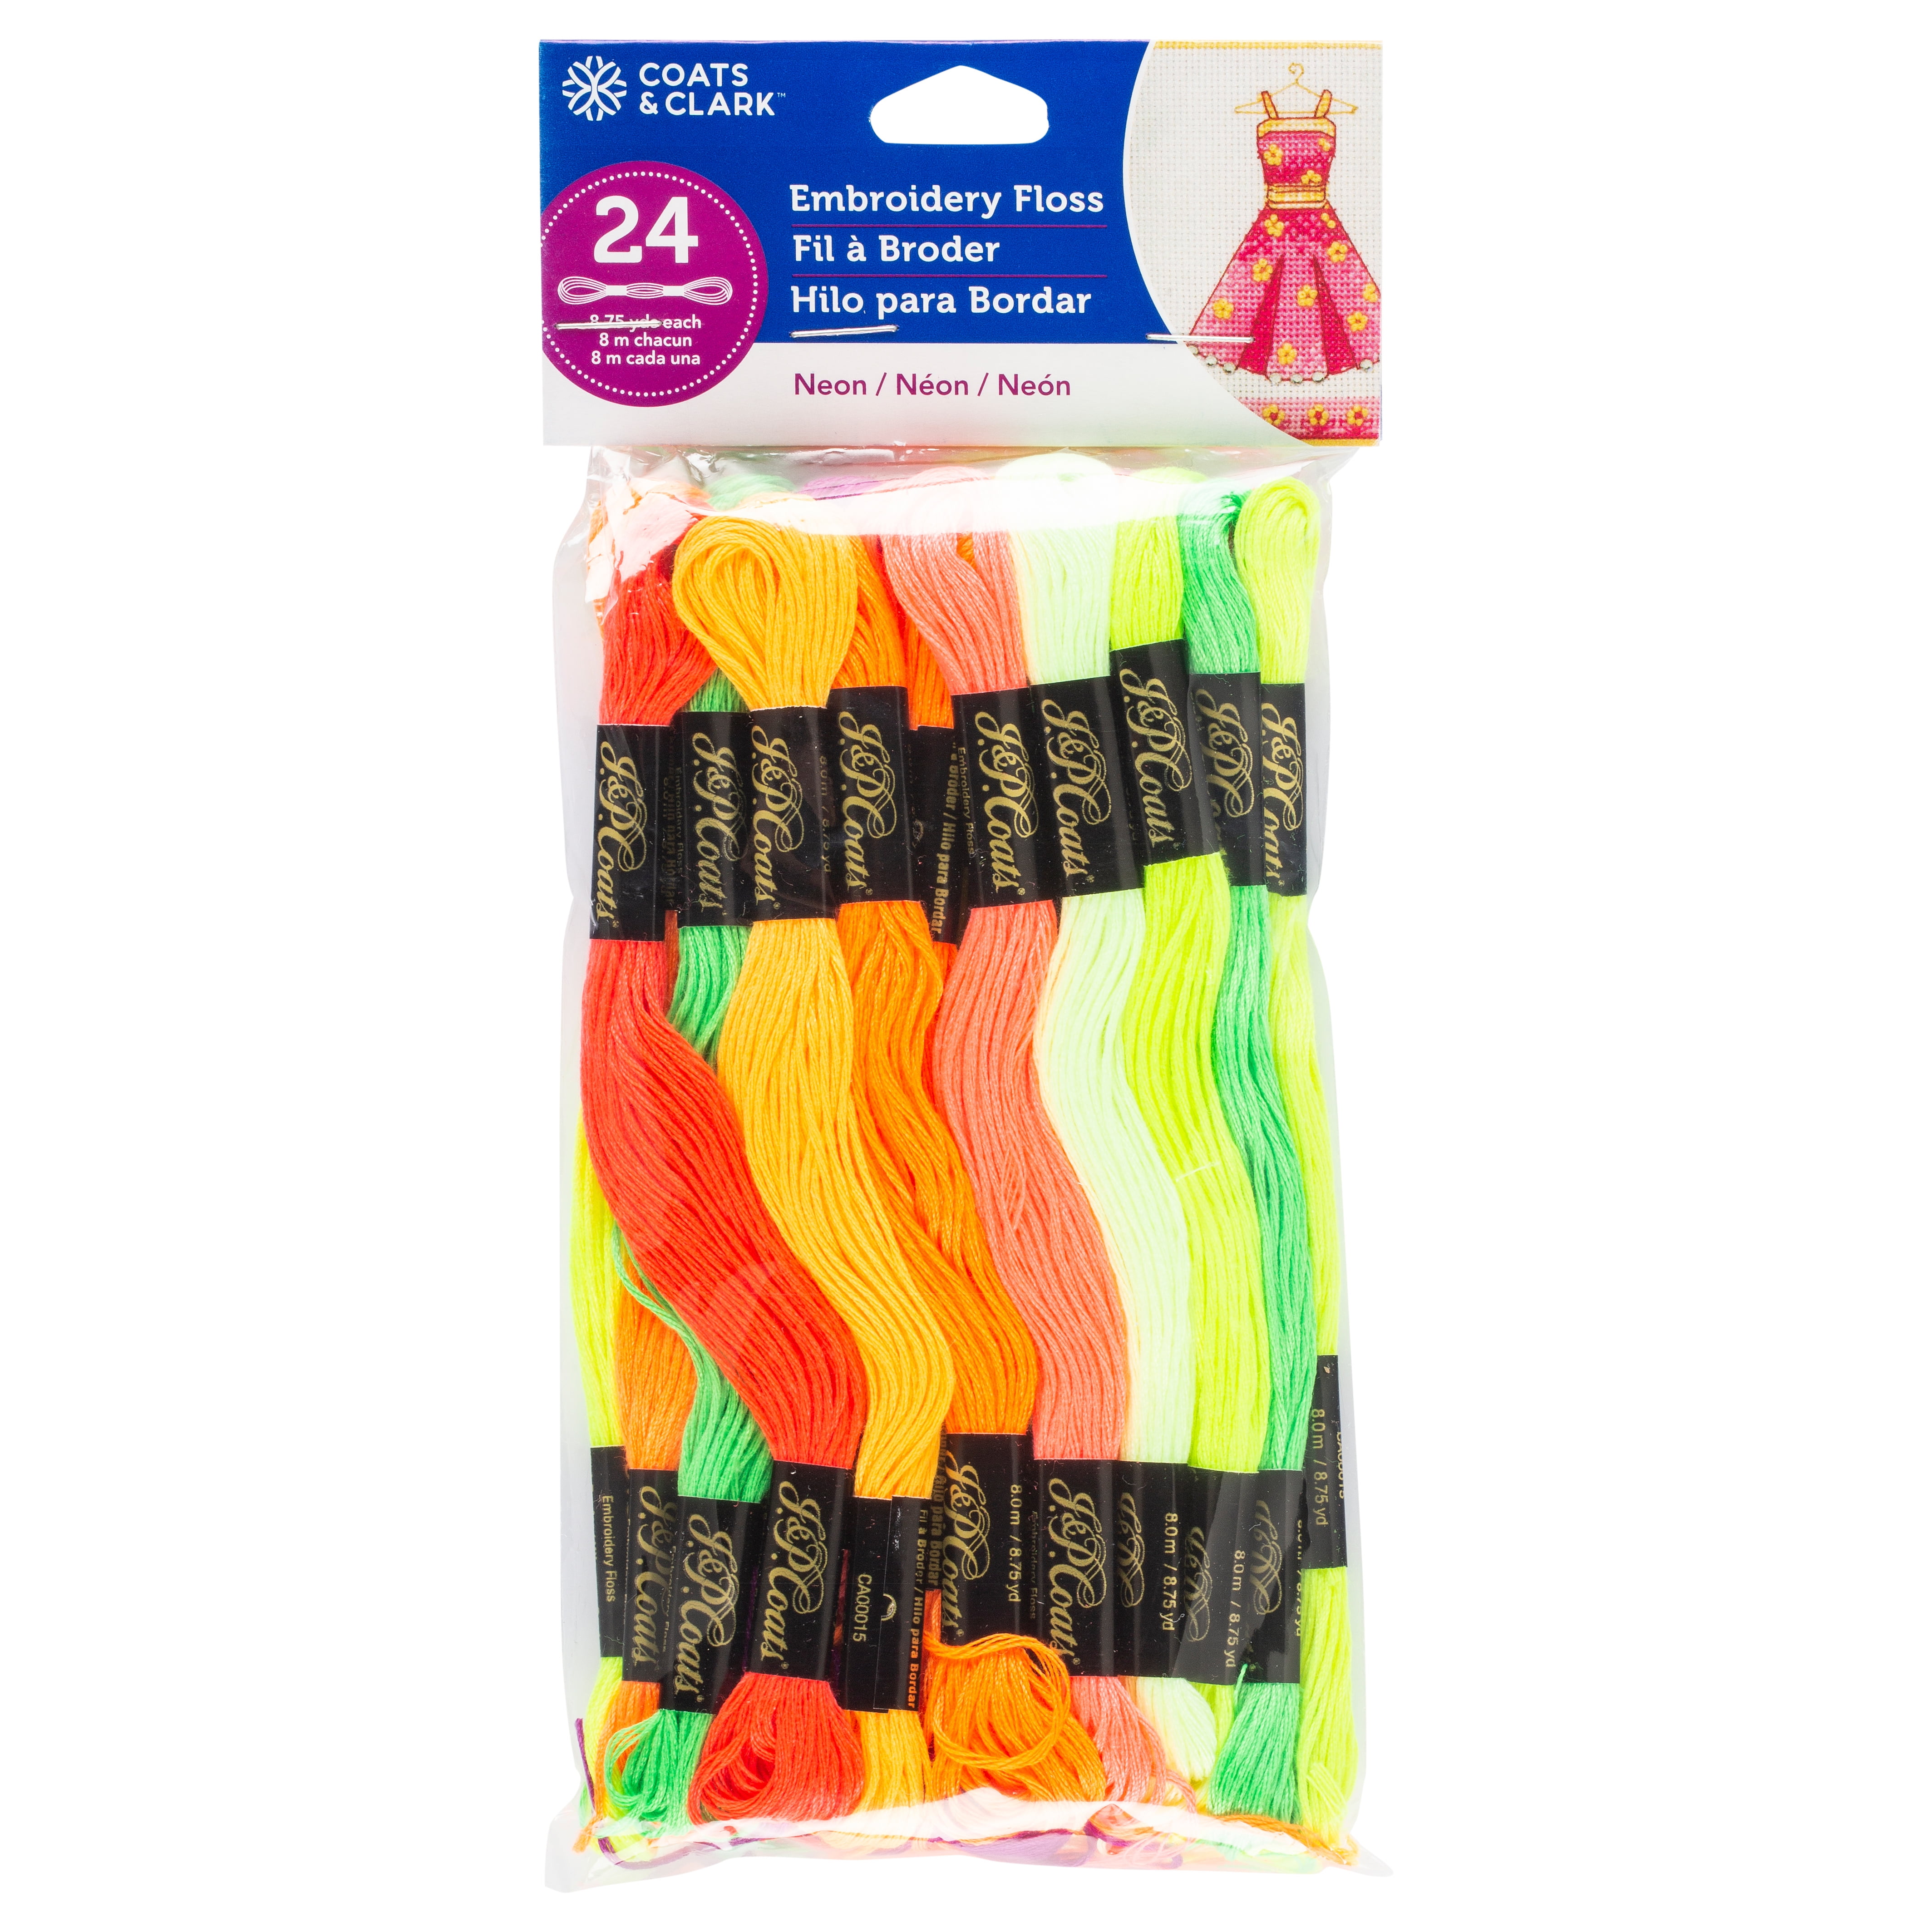 Coats & Clark® Black & White Embroidery Floss Value Pack 8.75 Yds